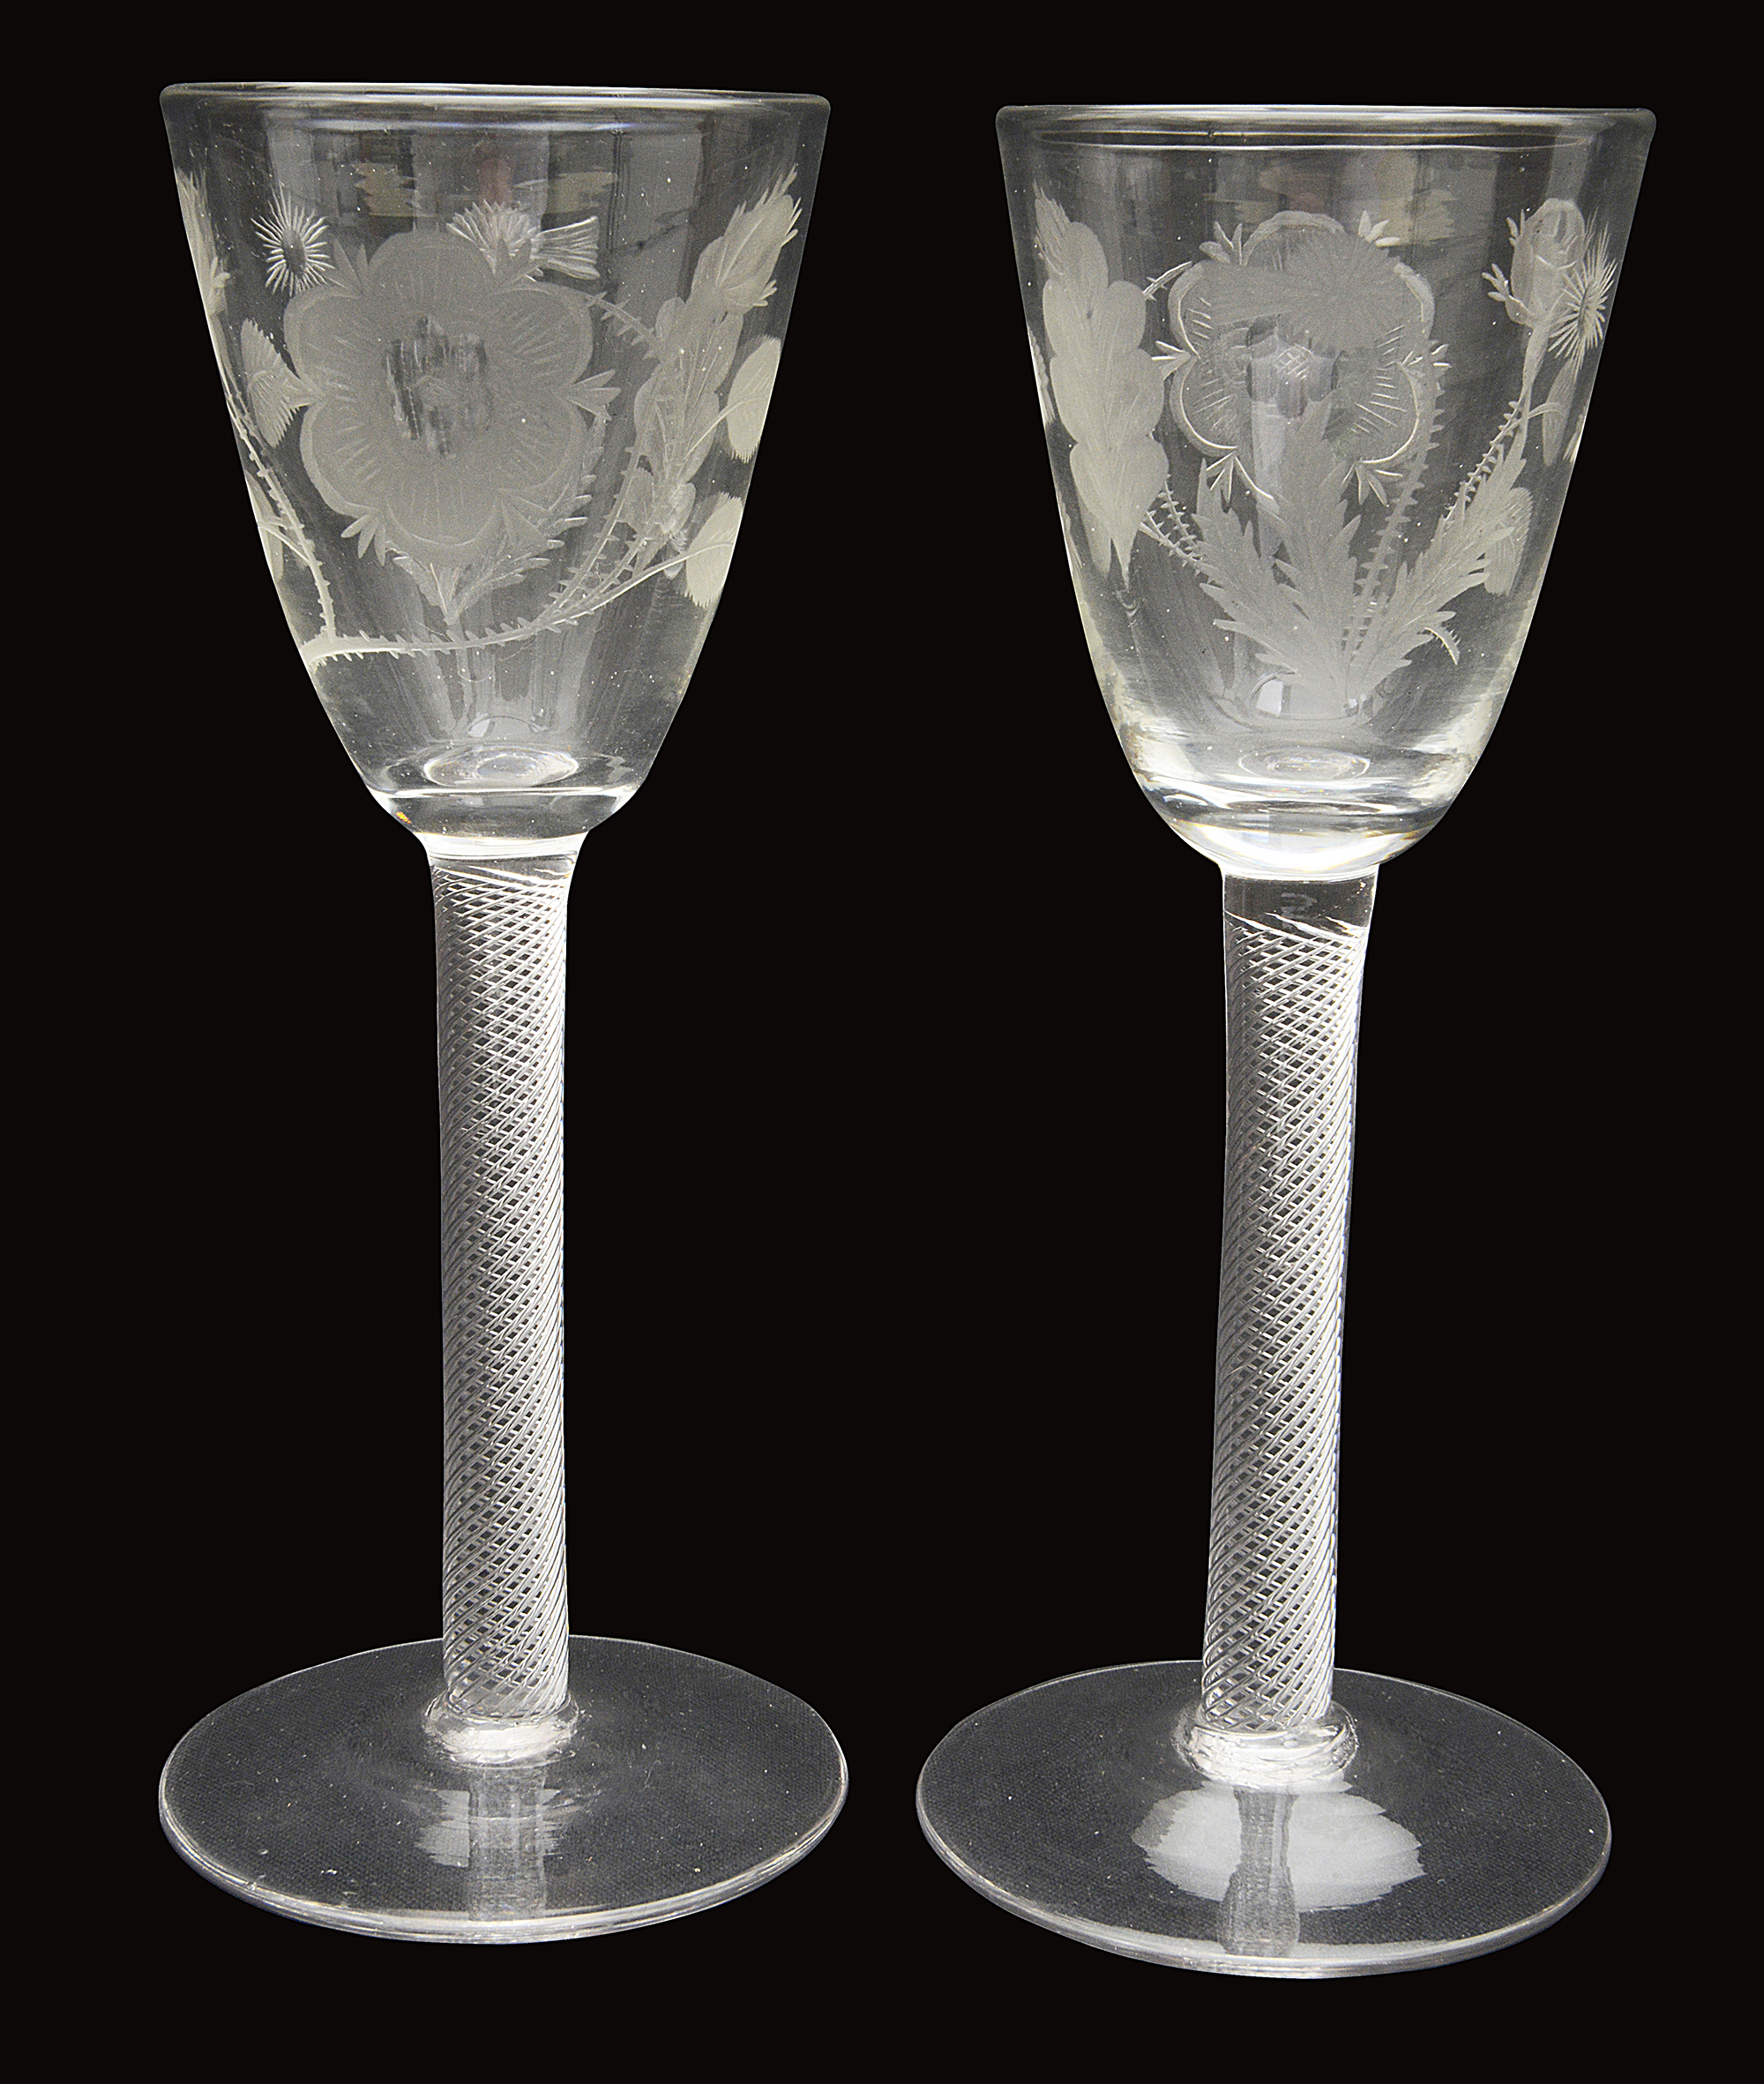 A pair of 18th century style Jacobite engraved air twist wine glasses